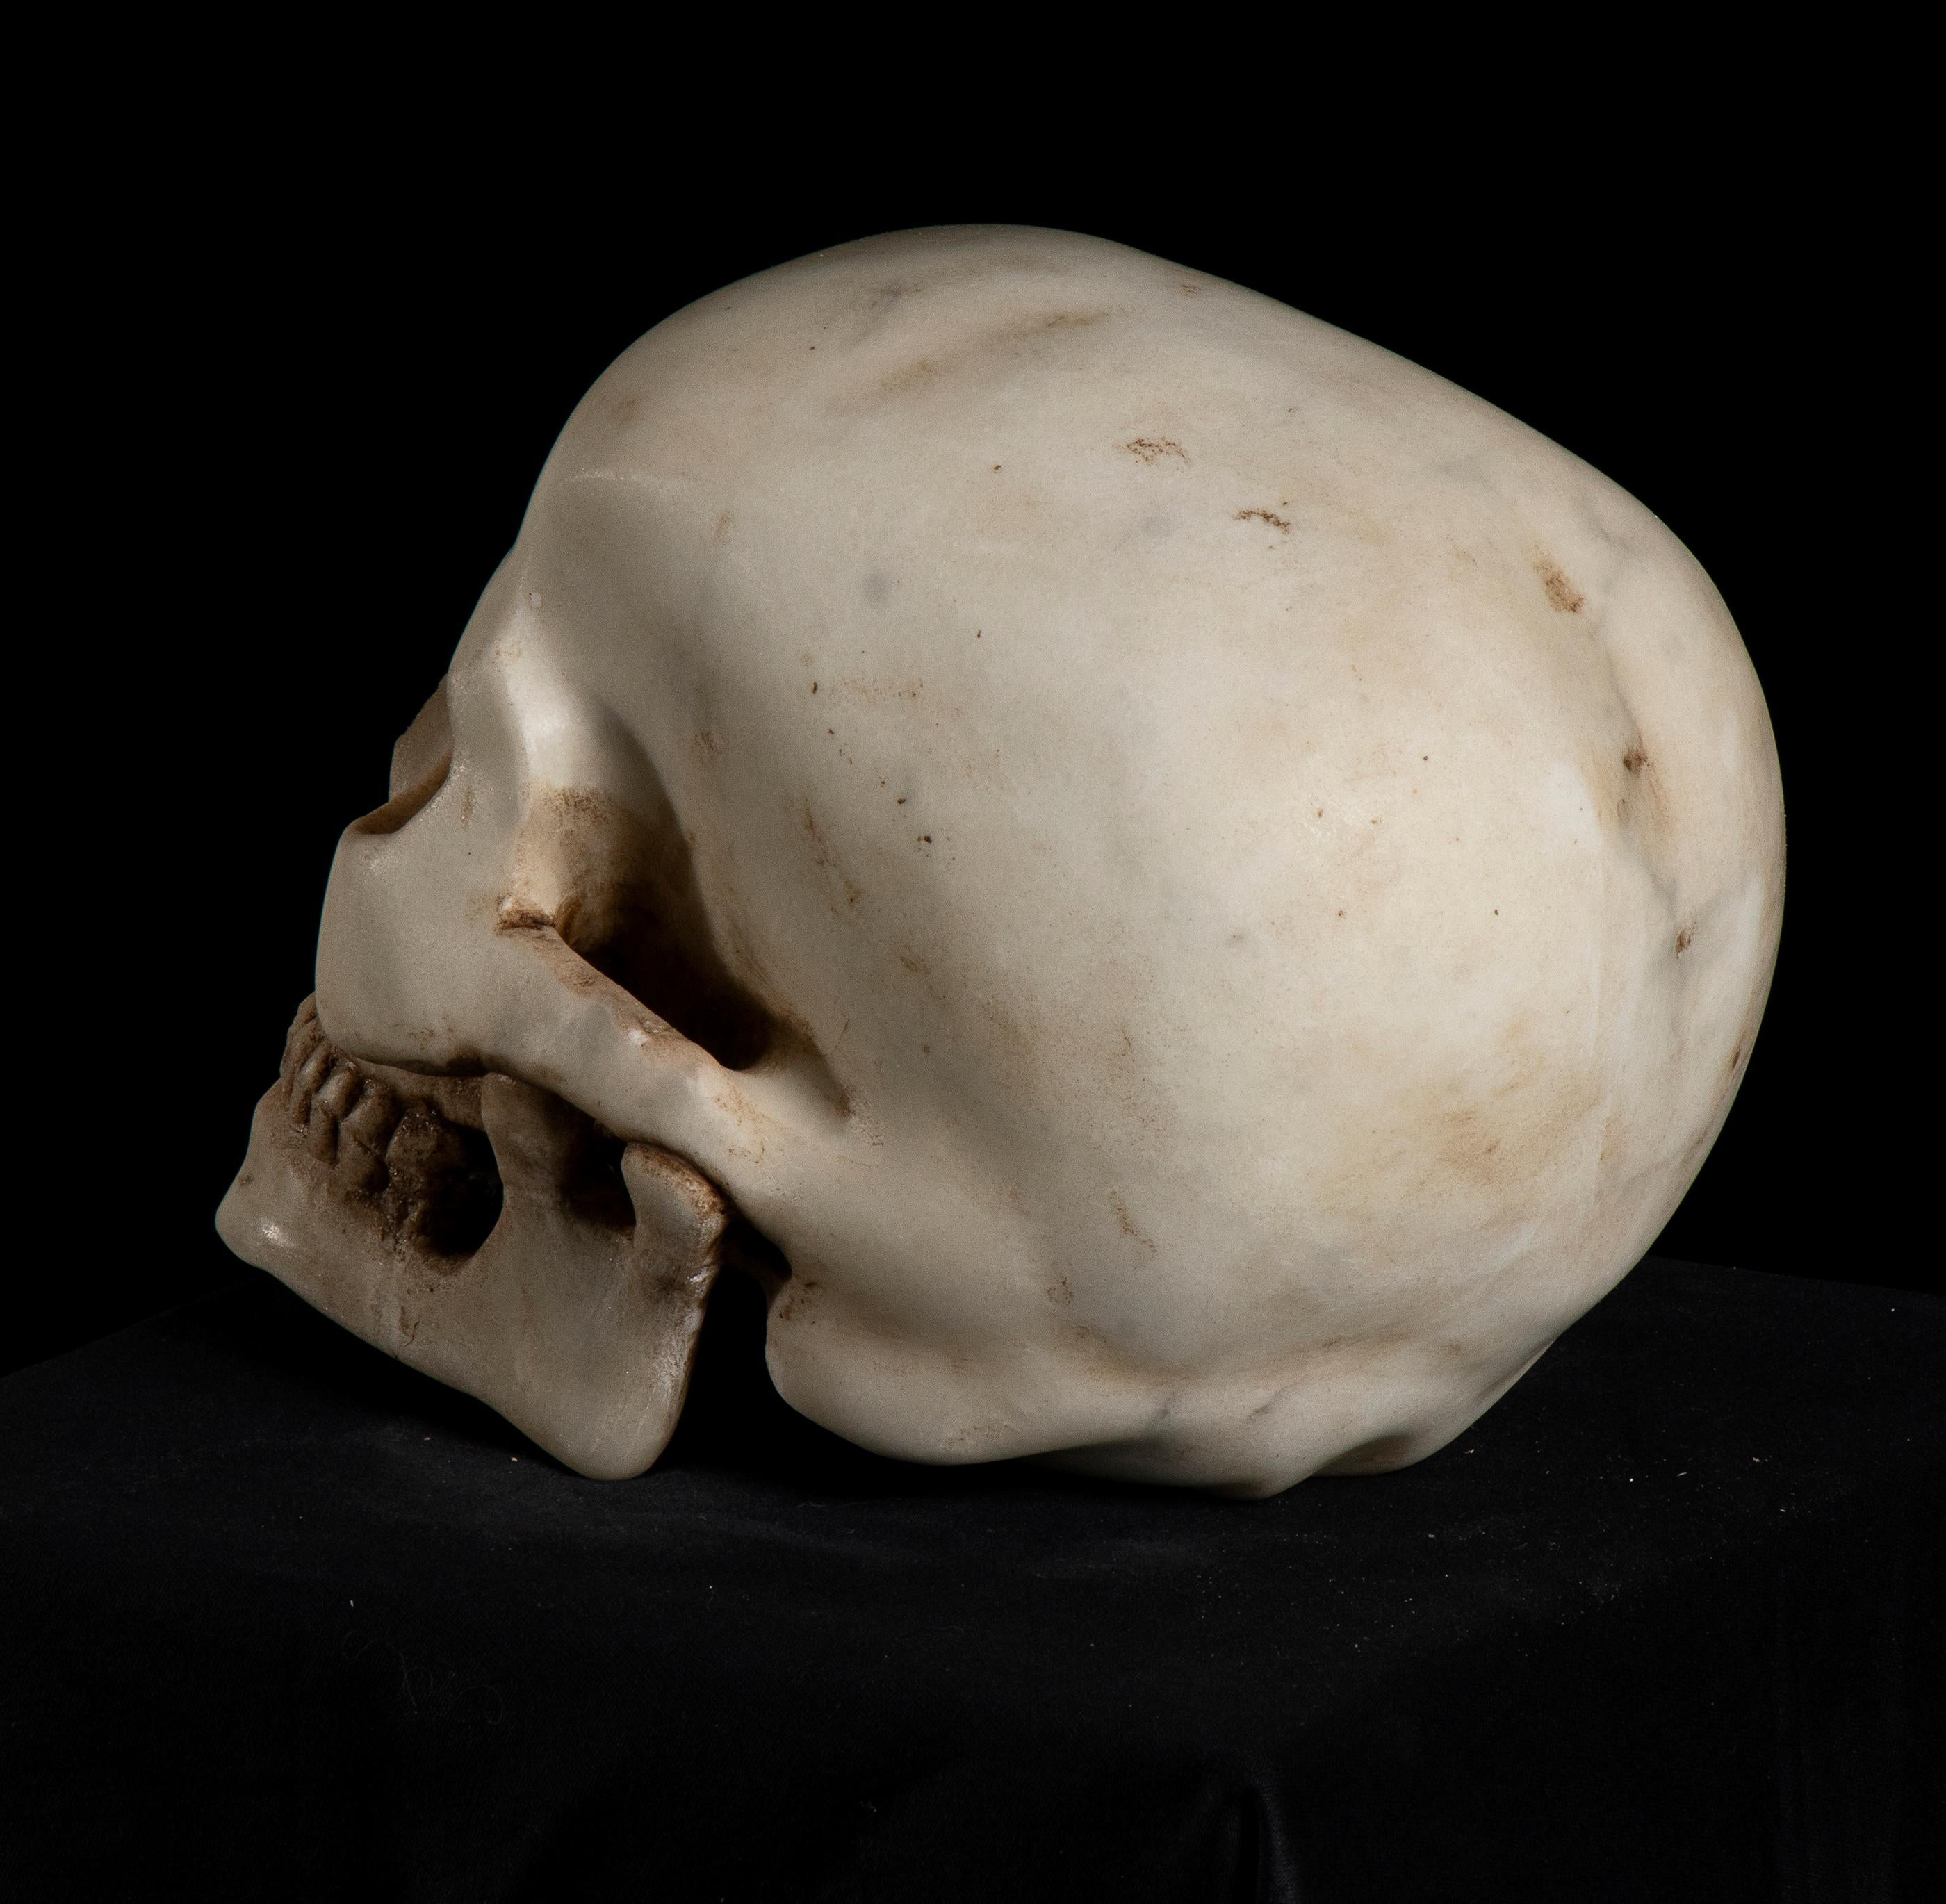 19th century, a depiction of Vanitas, skull in white marble. A vanitas is a symbolic work of art showing the transience of life, the futility of pleasure, and the certainty of death, often contrasting symbols of wealth and symbols of ephemerality